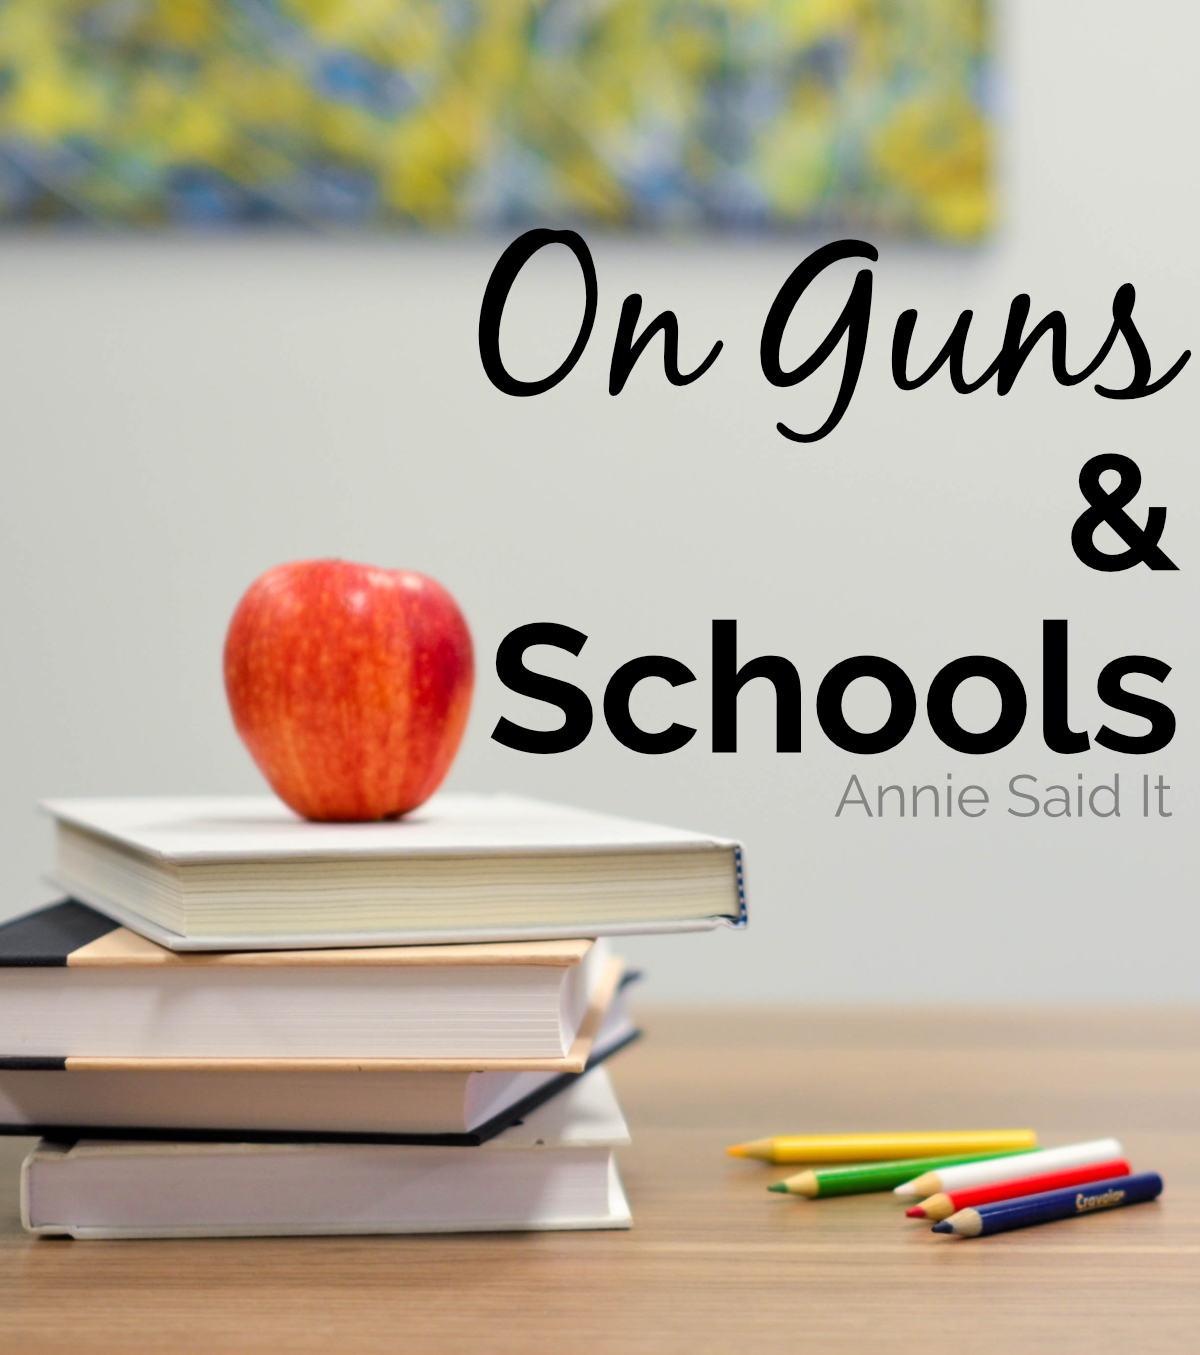 Let’s Debunk Myths About Guns and School, Shall We?